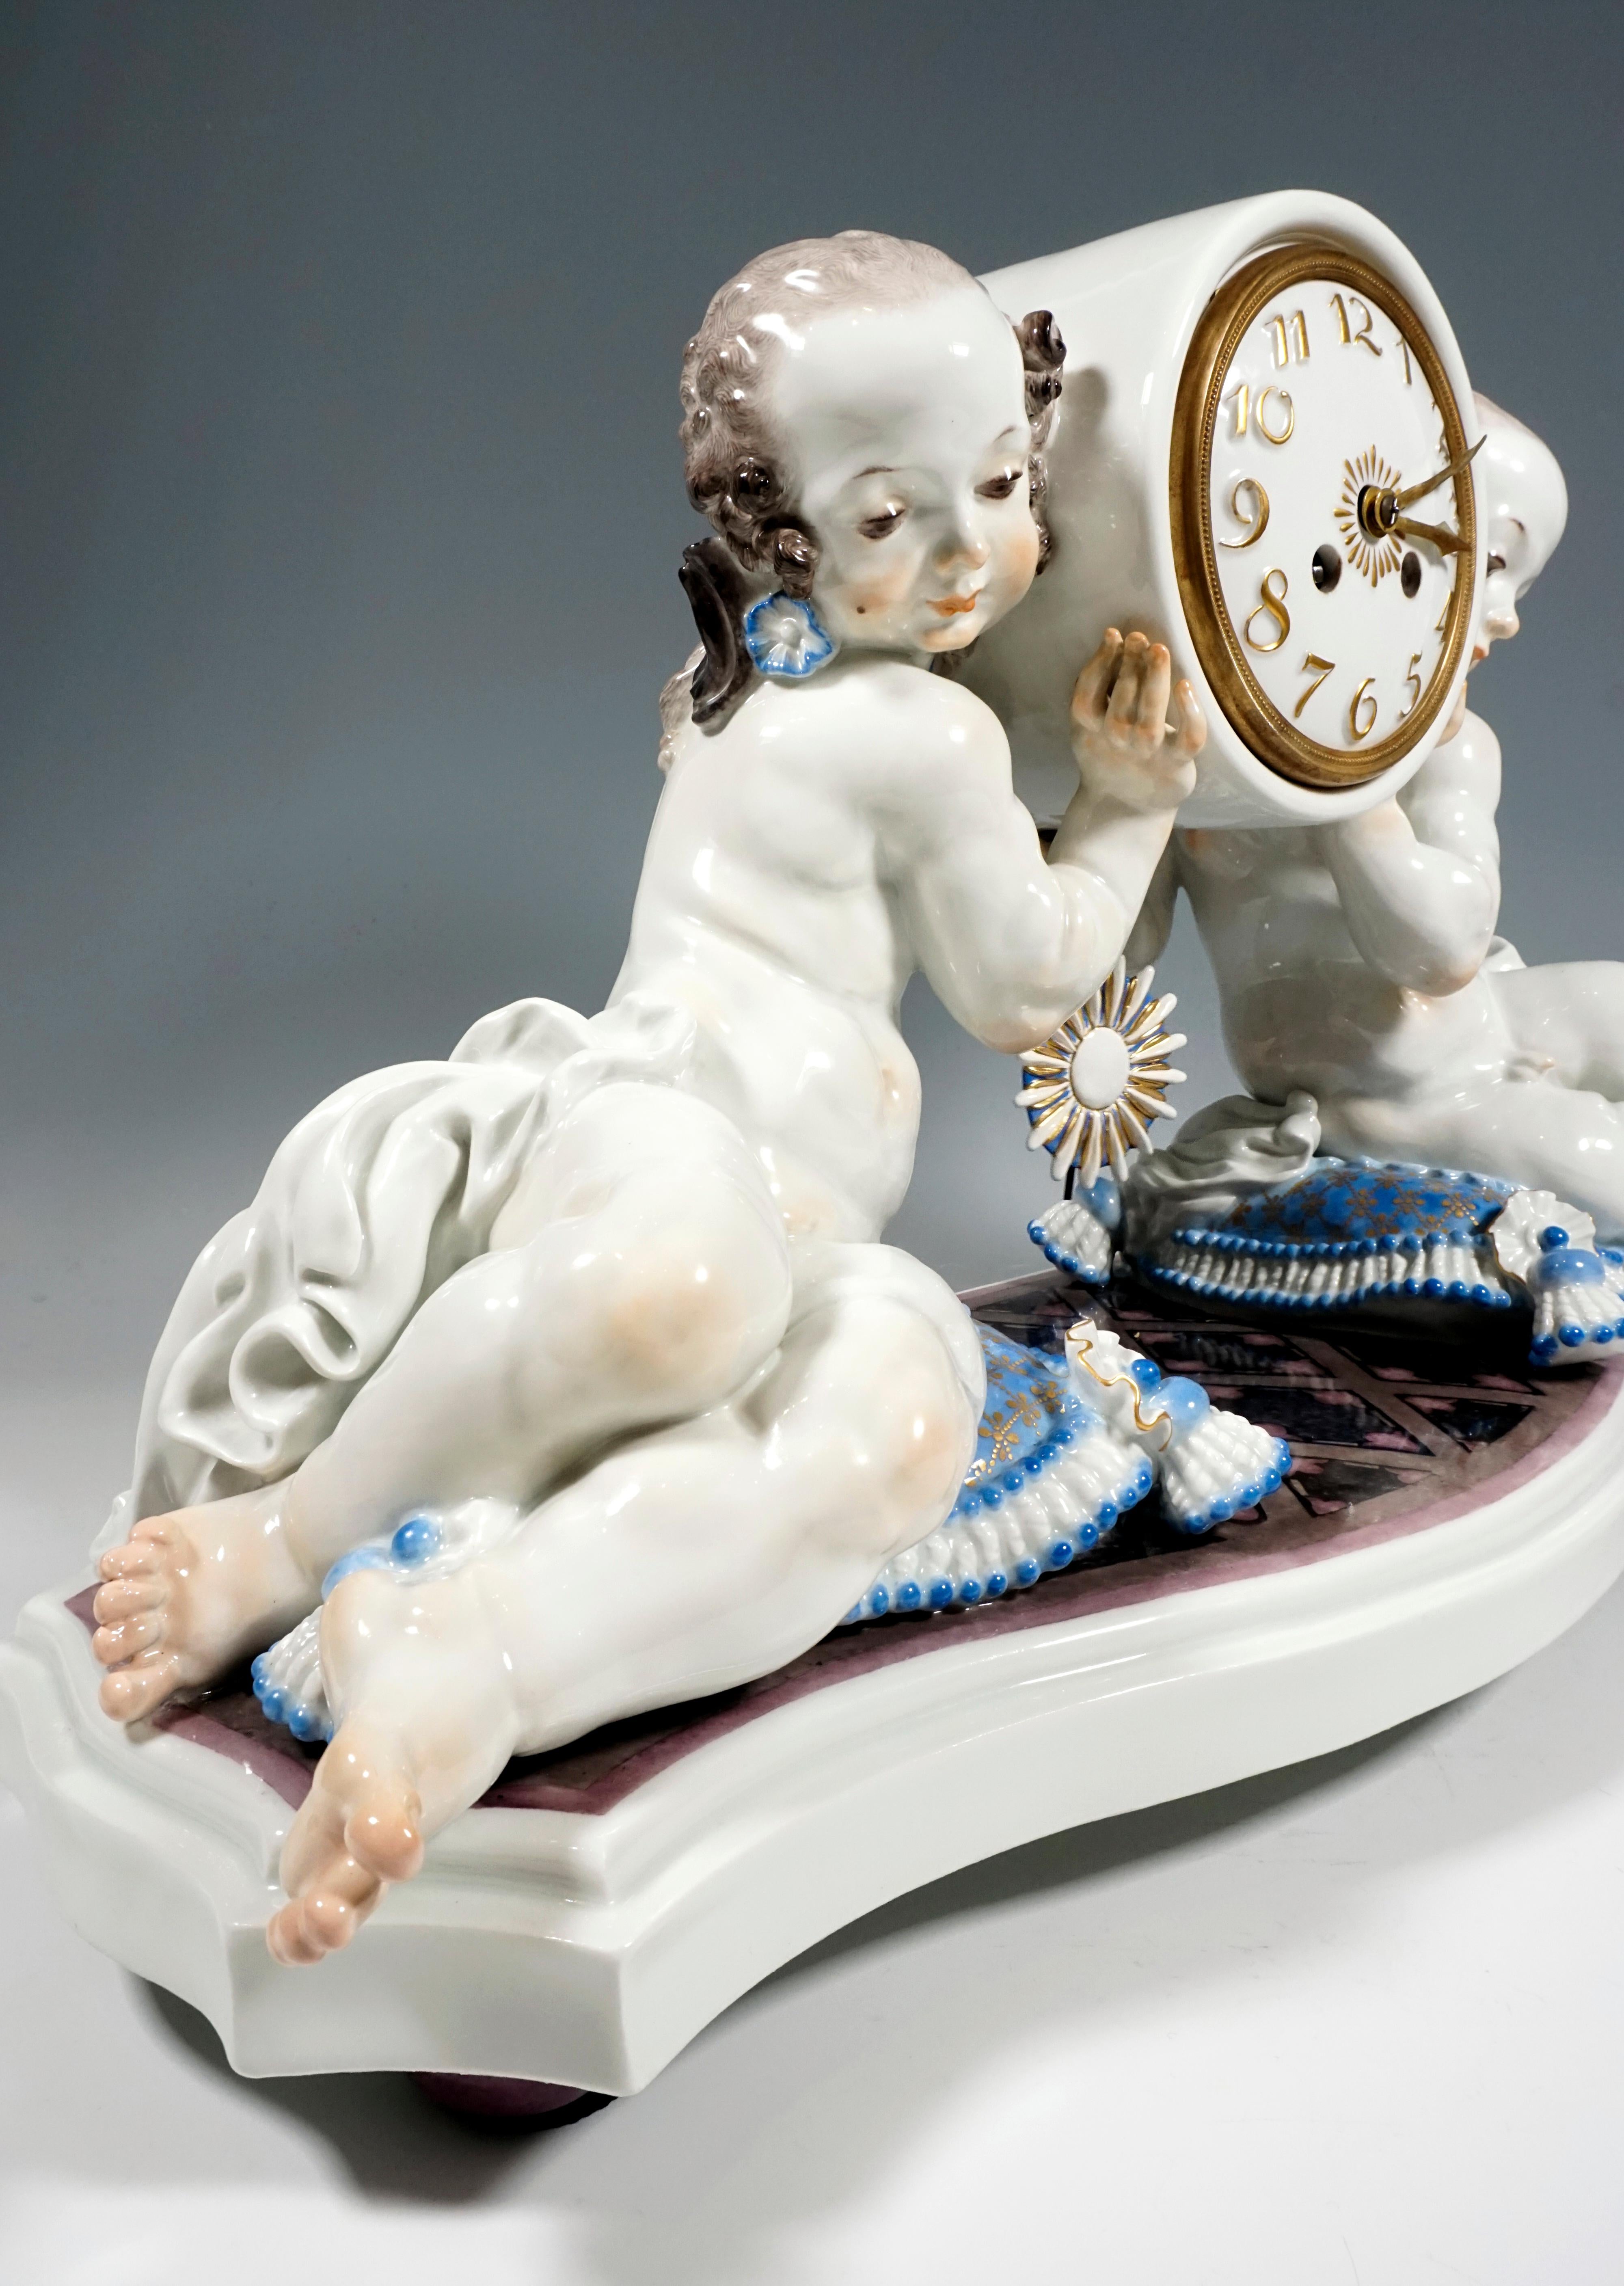 Rococo Revival Meissen Art Deco Mantle Clock with Two Putti by Paul Scheurich, 1920-1924